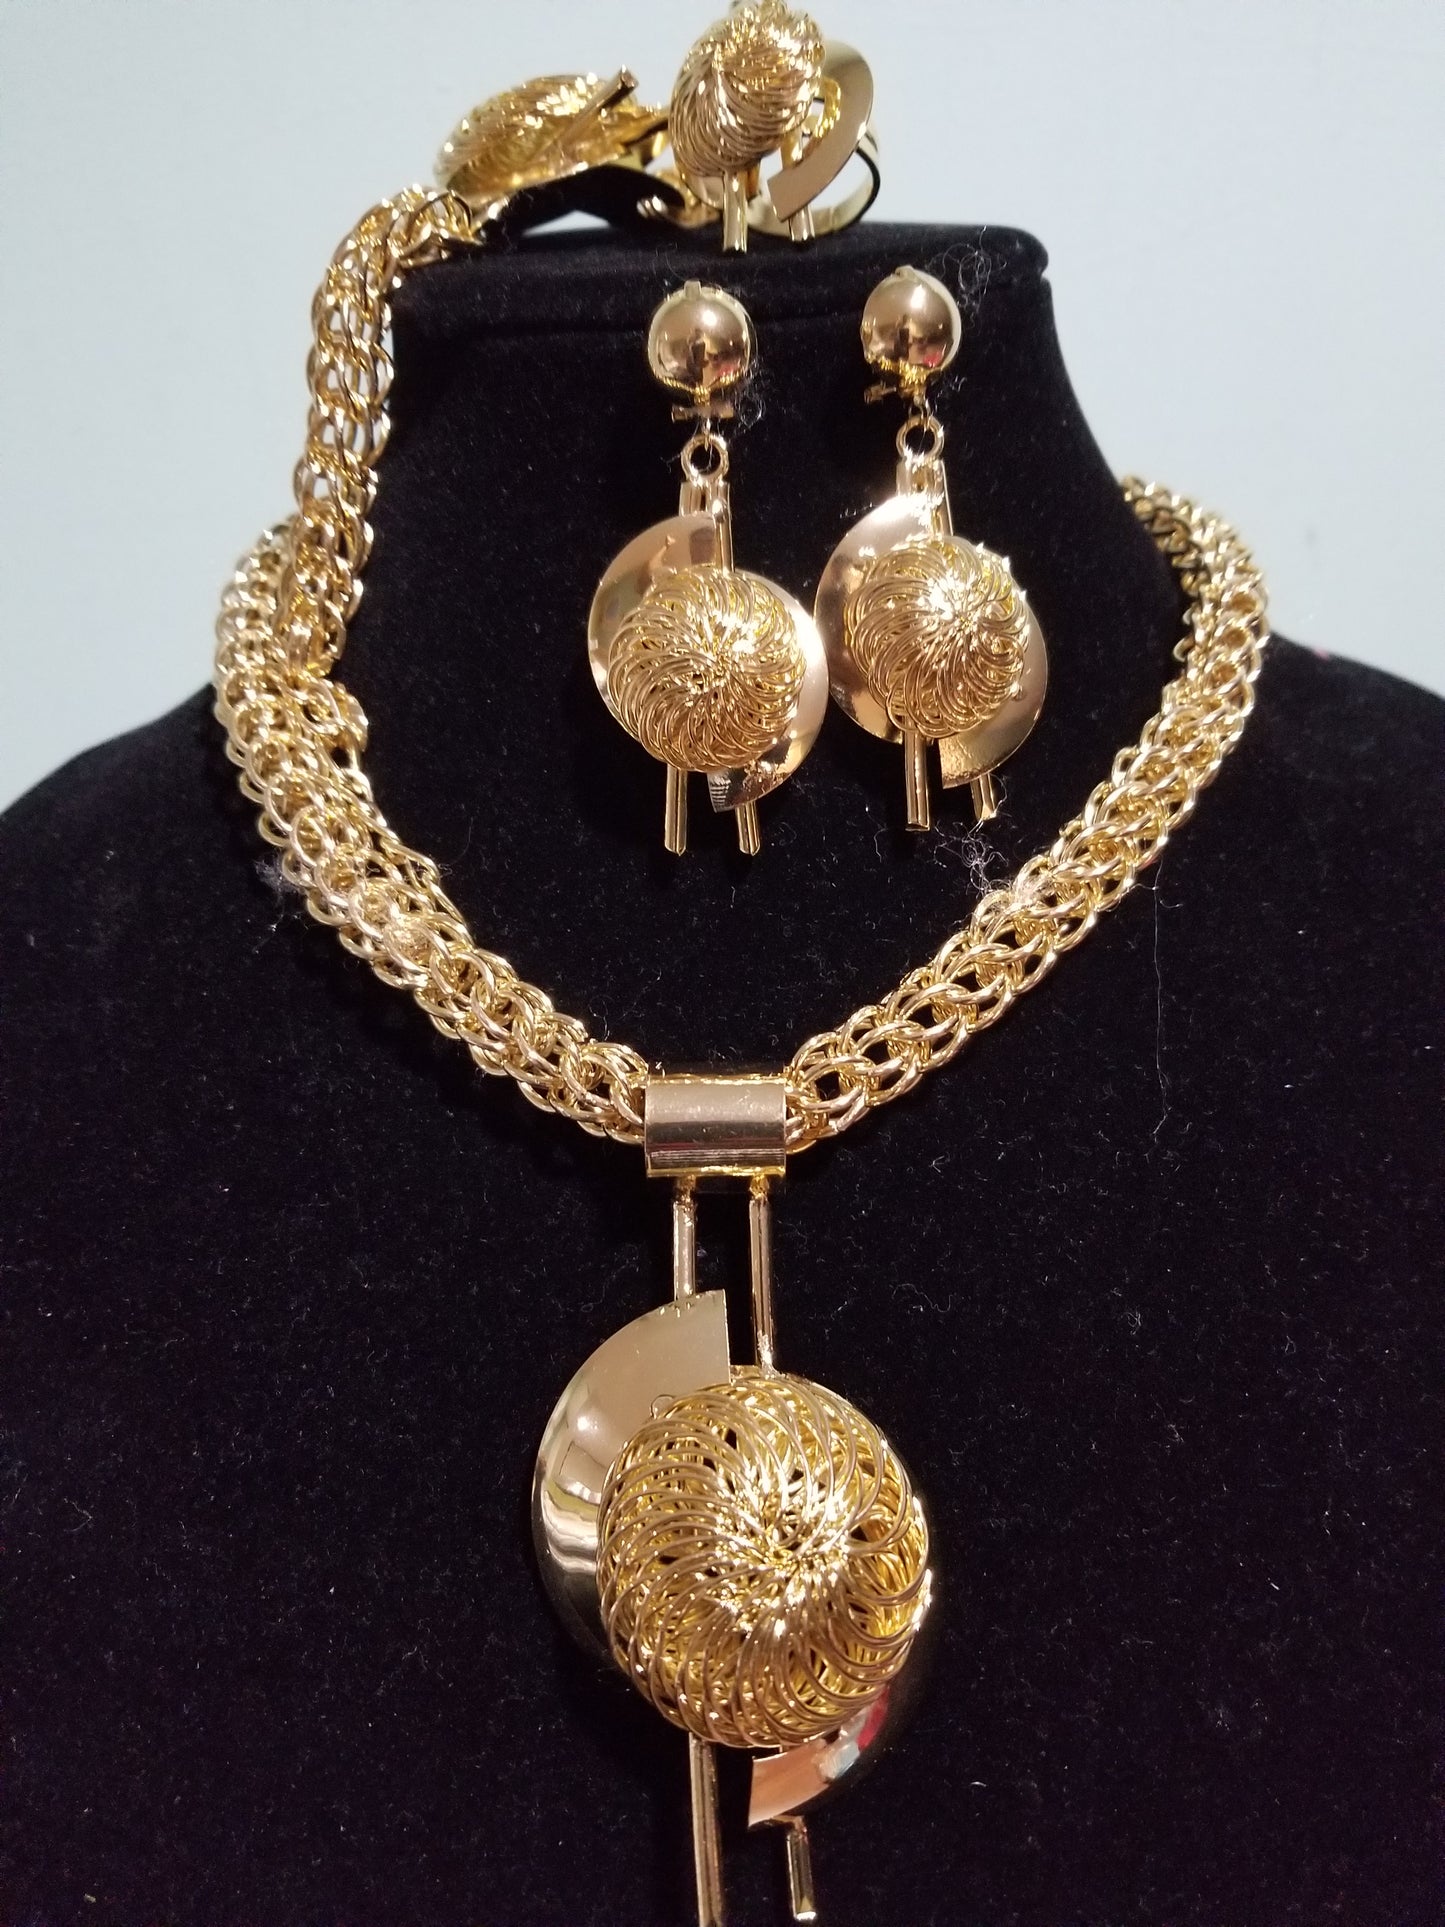 Beautiful costume jewelry set in 18k gold plating. High quality hypoallergenic jewelry set. 4pcs set.